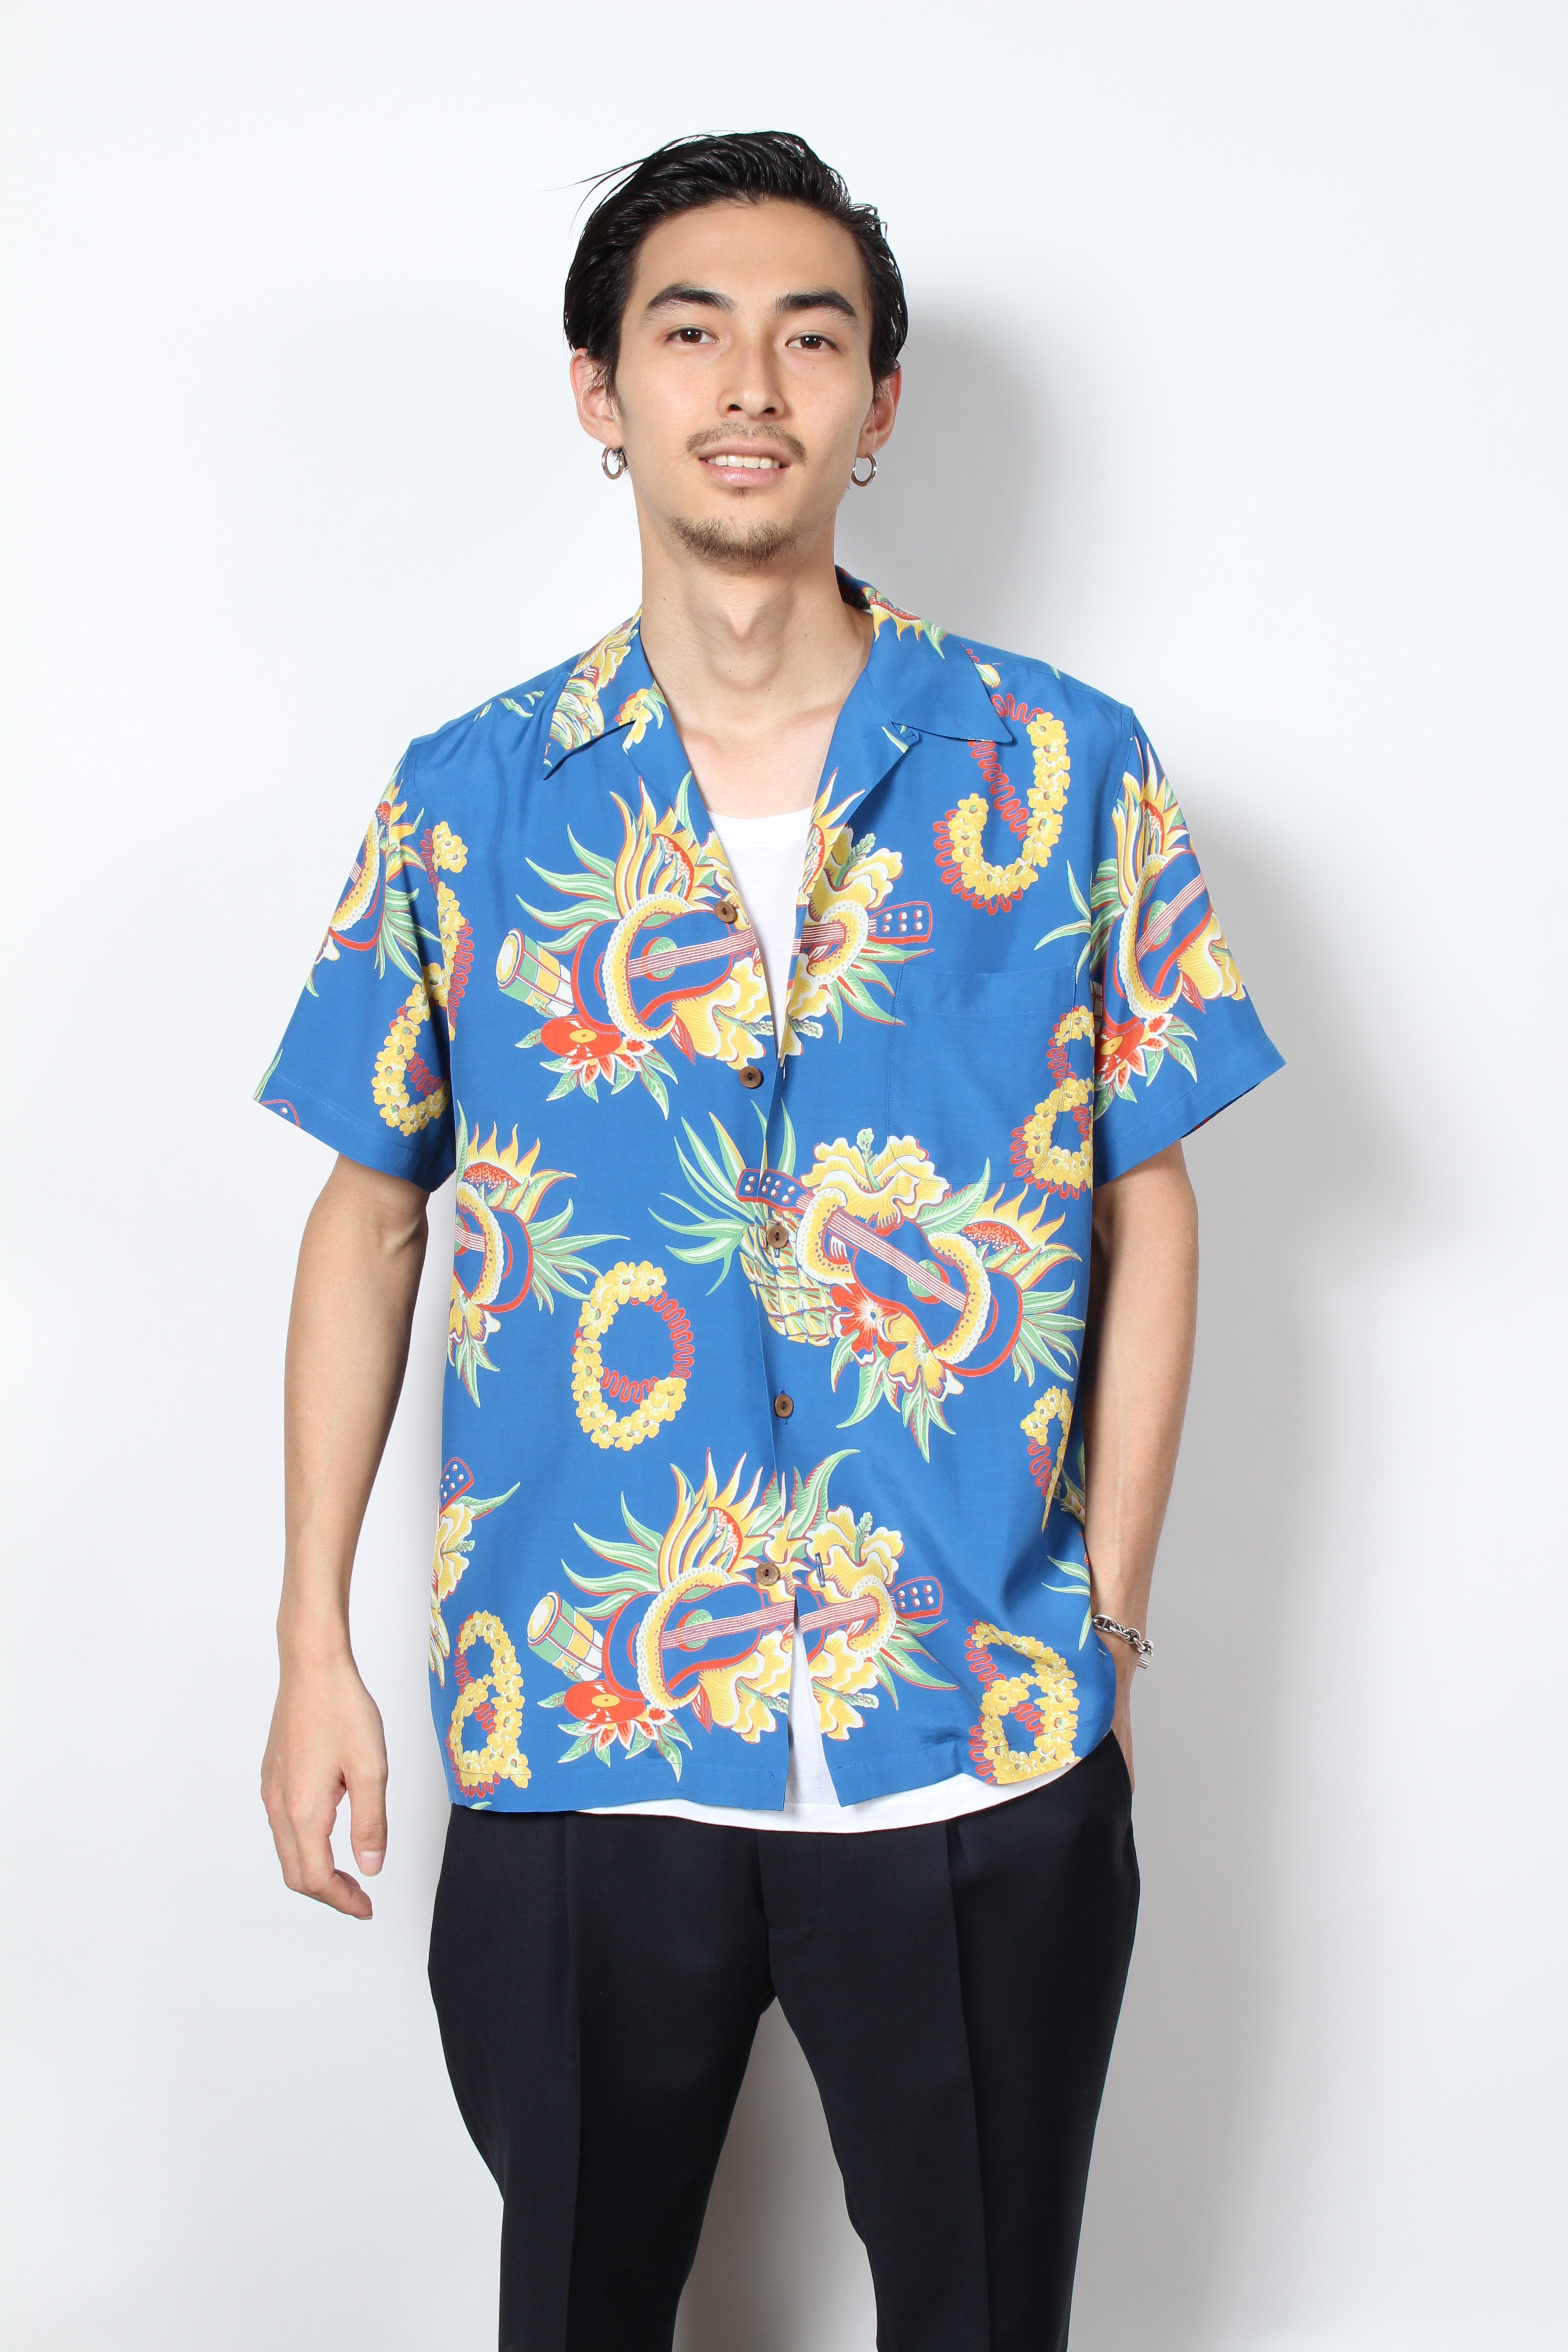 RELAX – (R)evolution » Blog Archive » 7/13 WACKO MARIA / NEW ARRIVAL